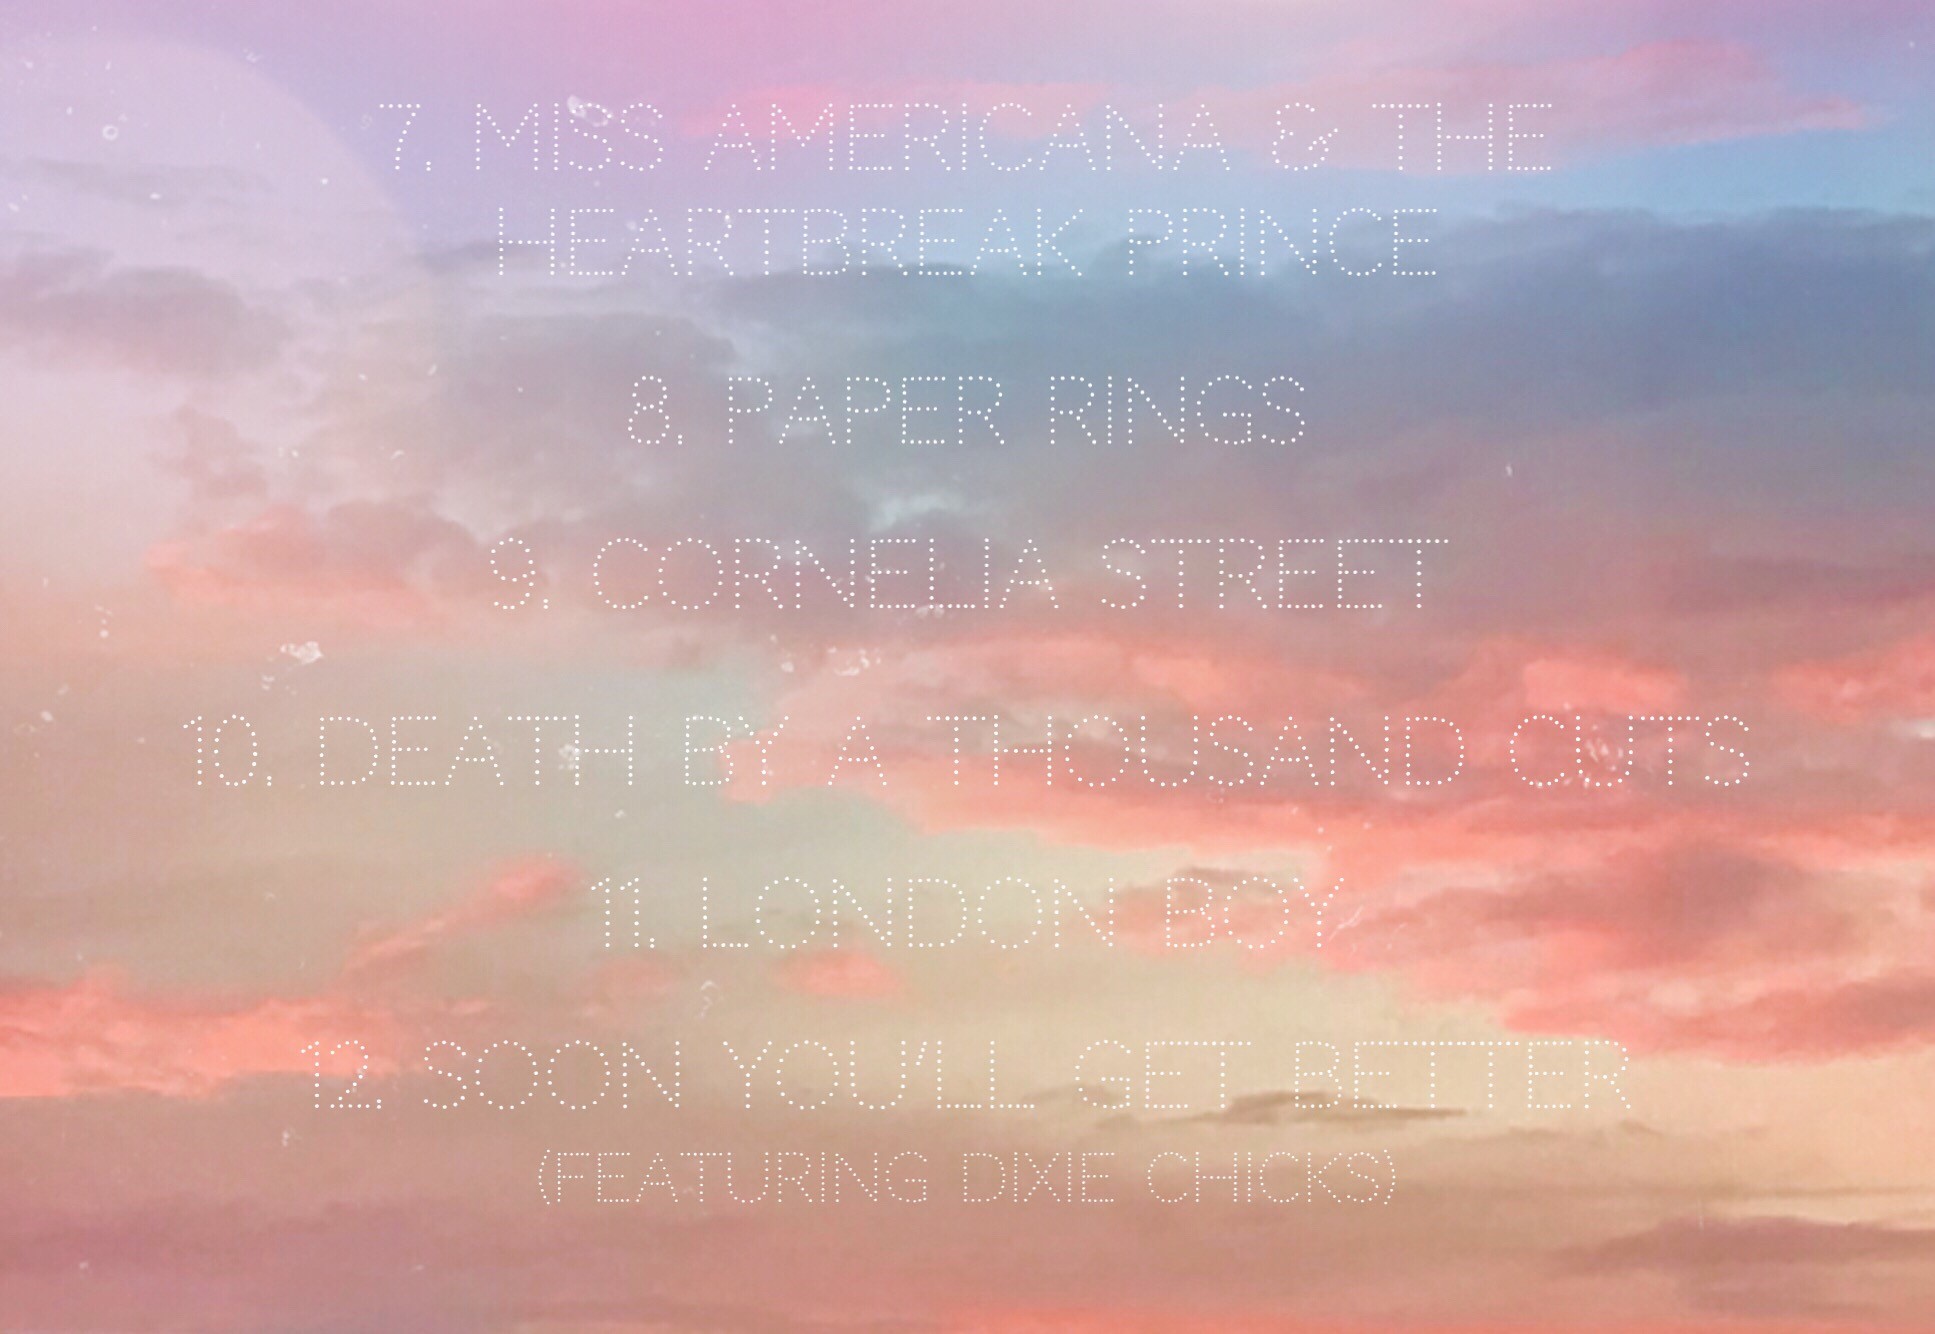 Taylor Swift Reveals Tracklist For New Album 'Lover' - Stereoboard1935 x 1334